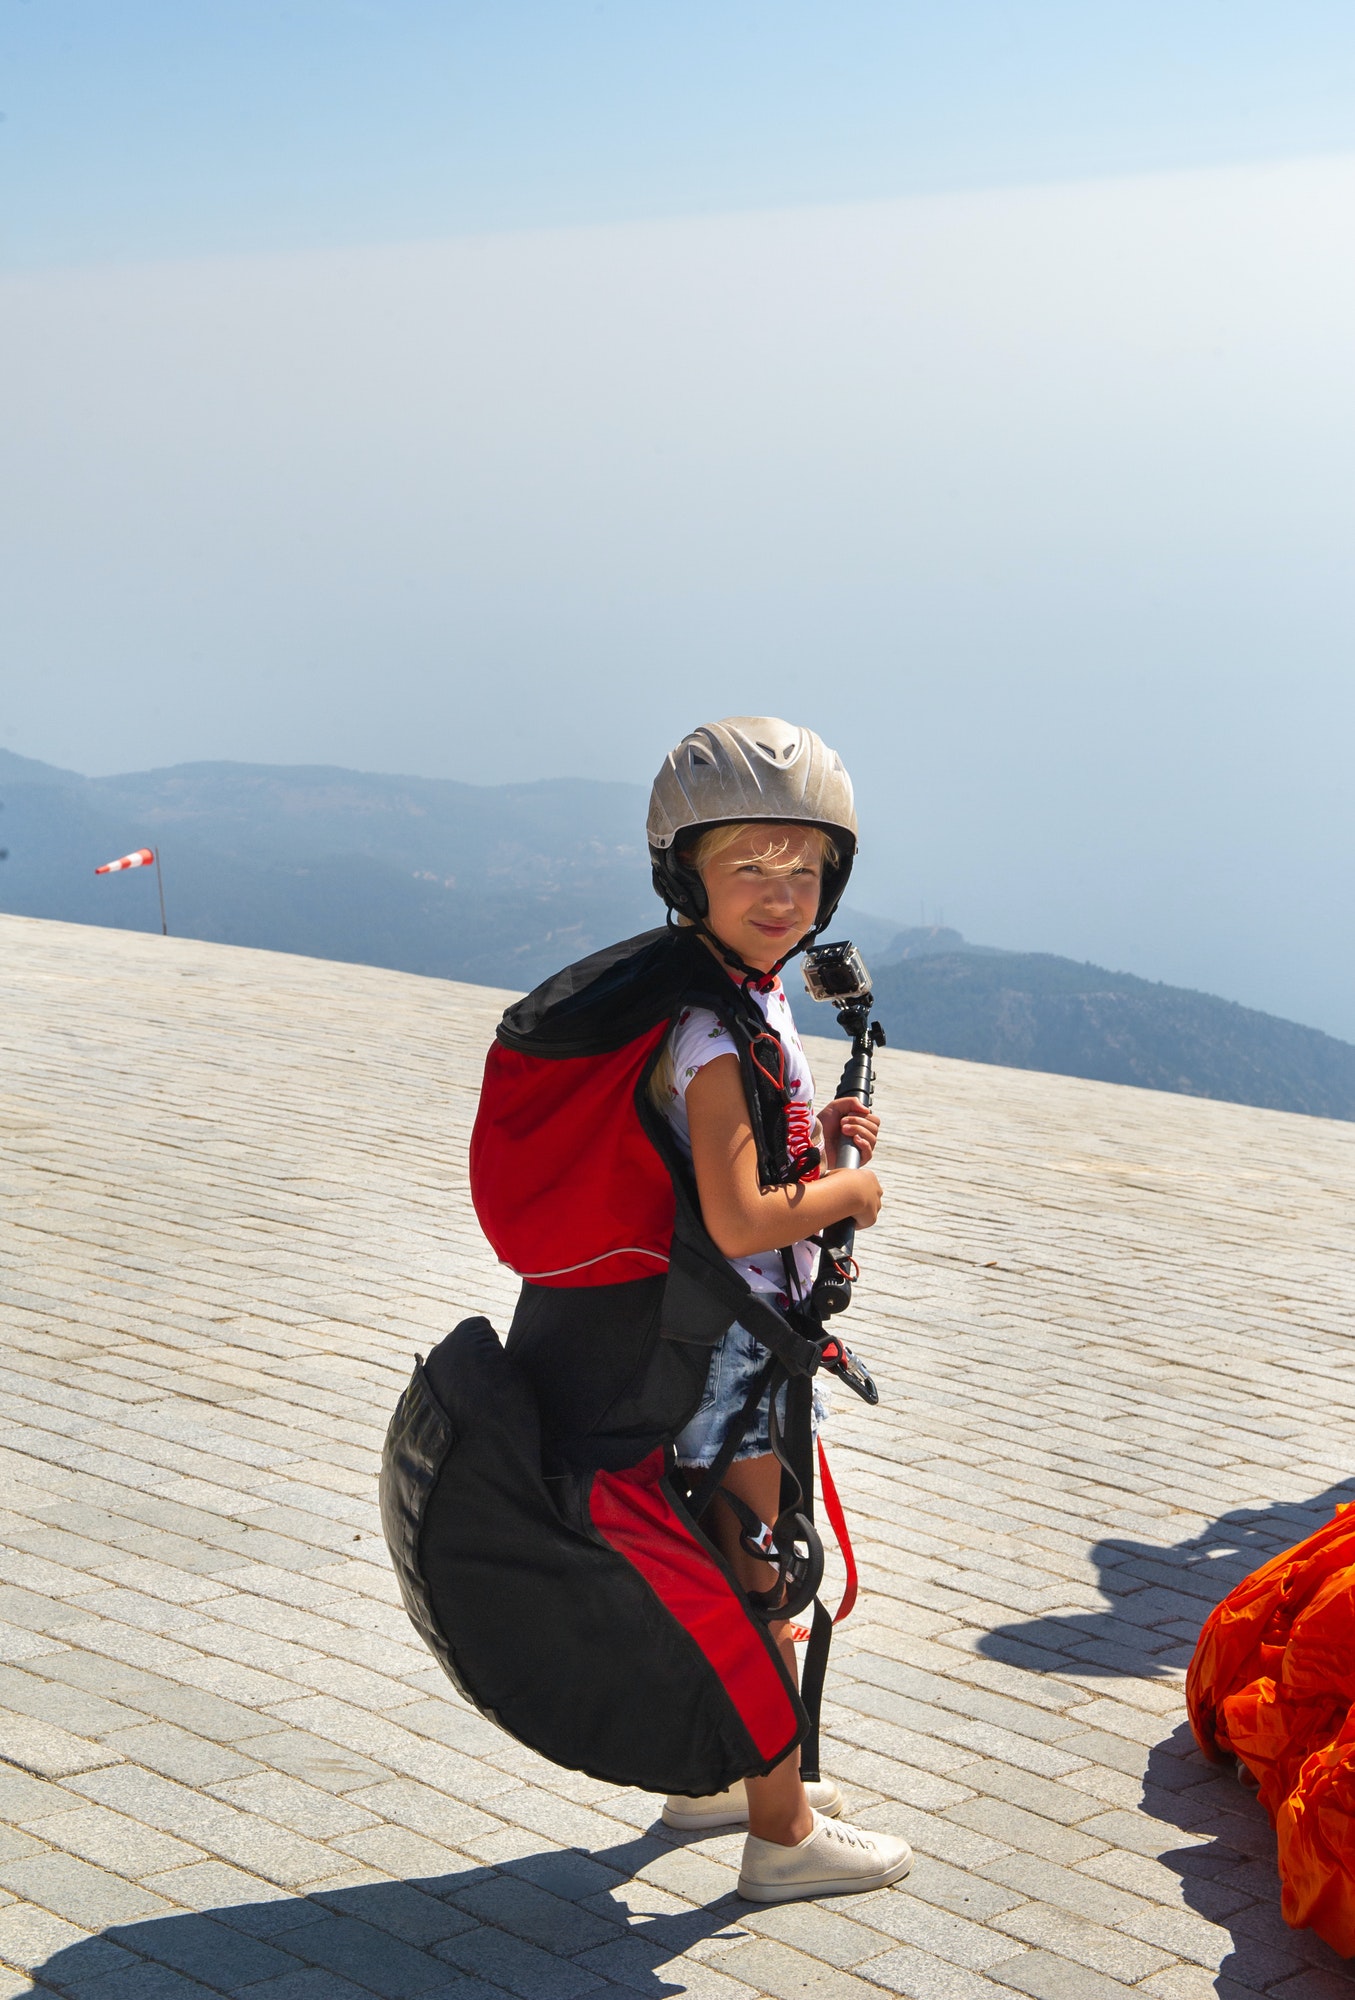 a-little-girl-in-paragliding-gear-and-with-a-camera-stands-on-the-edge-of-mount-babadag-turkey-1.jpg